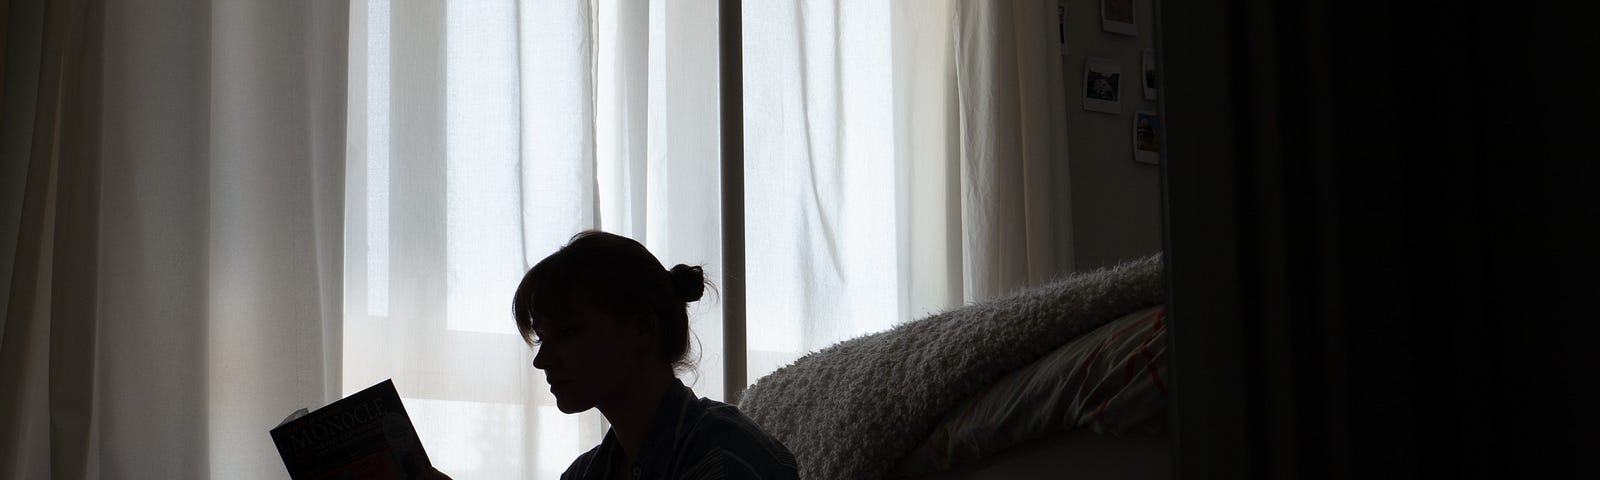 Dark image of a teenage girl reading on the floor next to a bed and curtained window